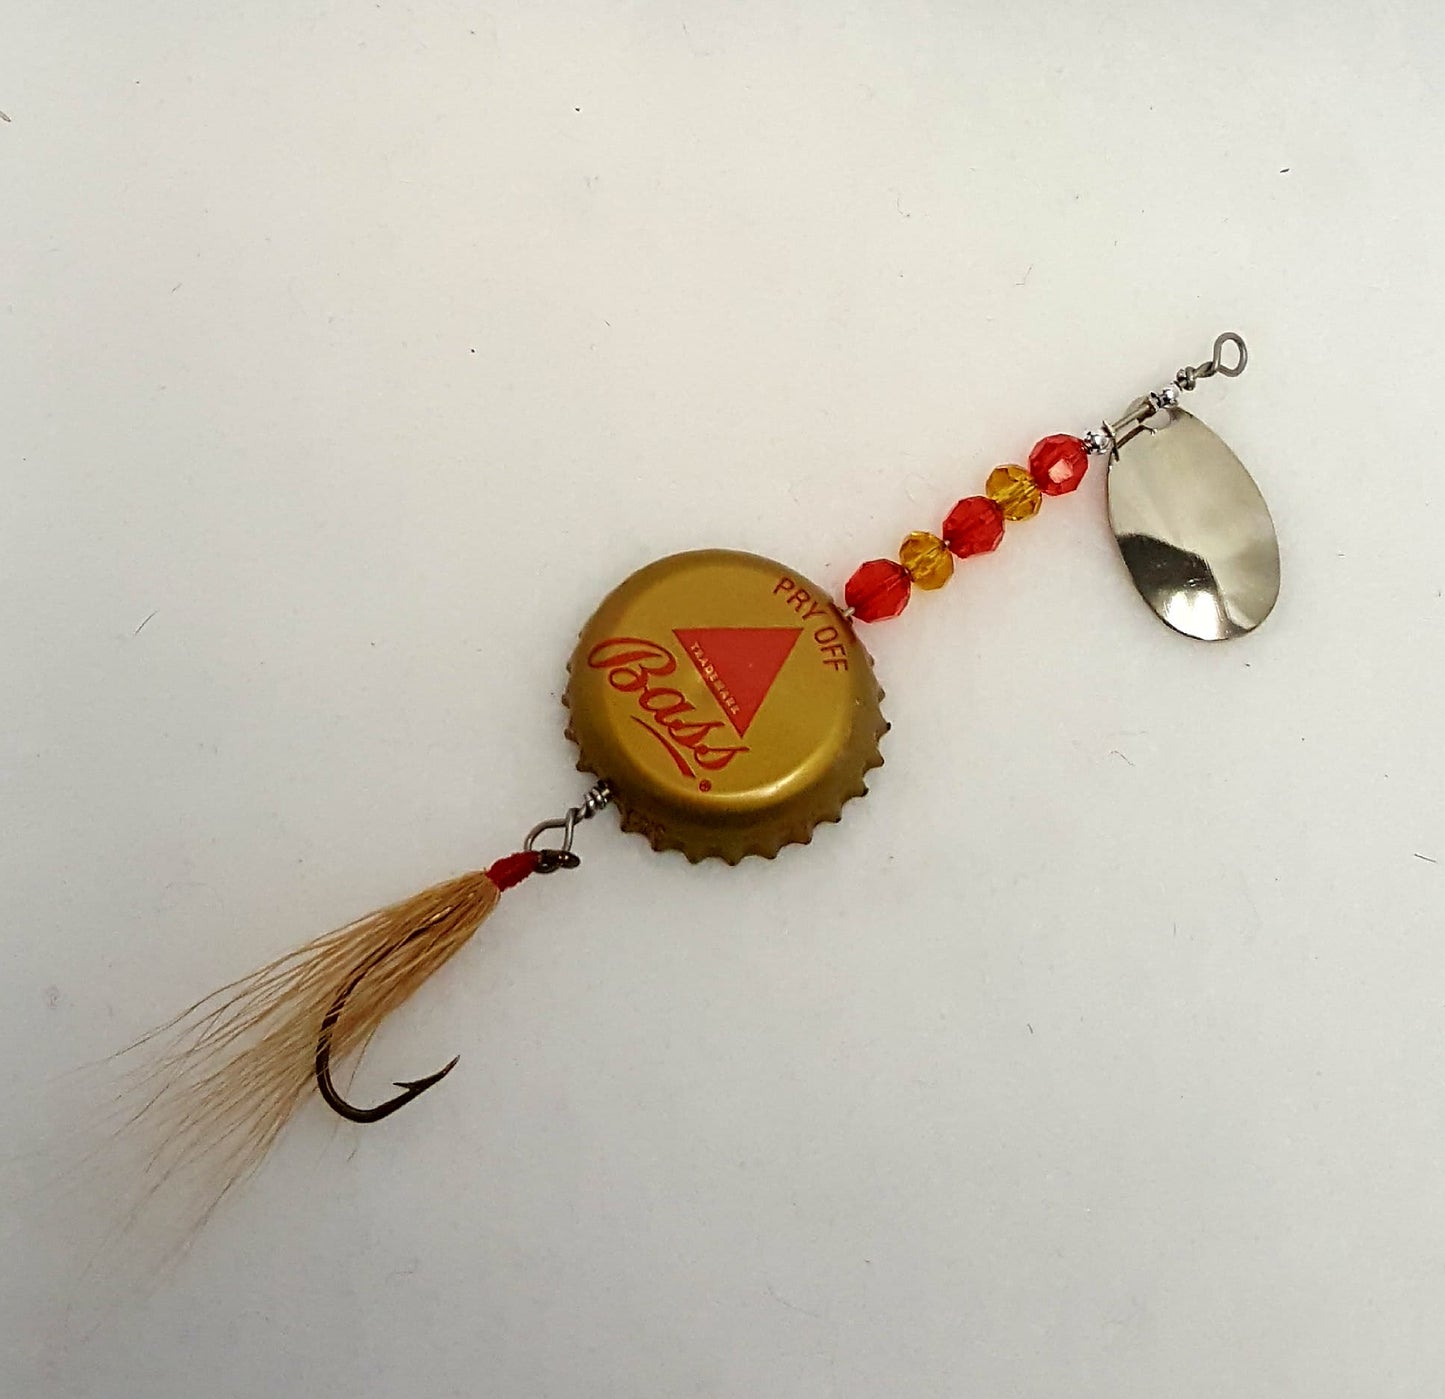 Lure has a gold bottle cap with red triangle, red & gold beads, and gold fly.